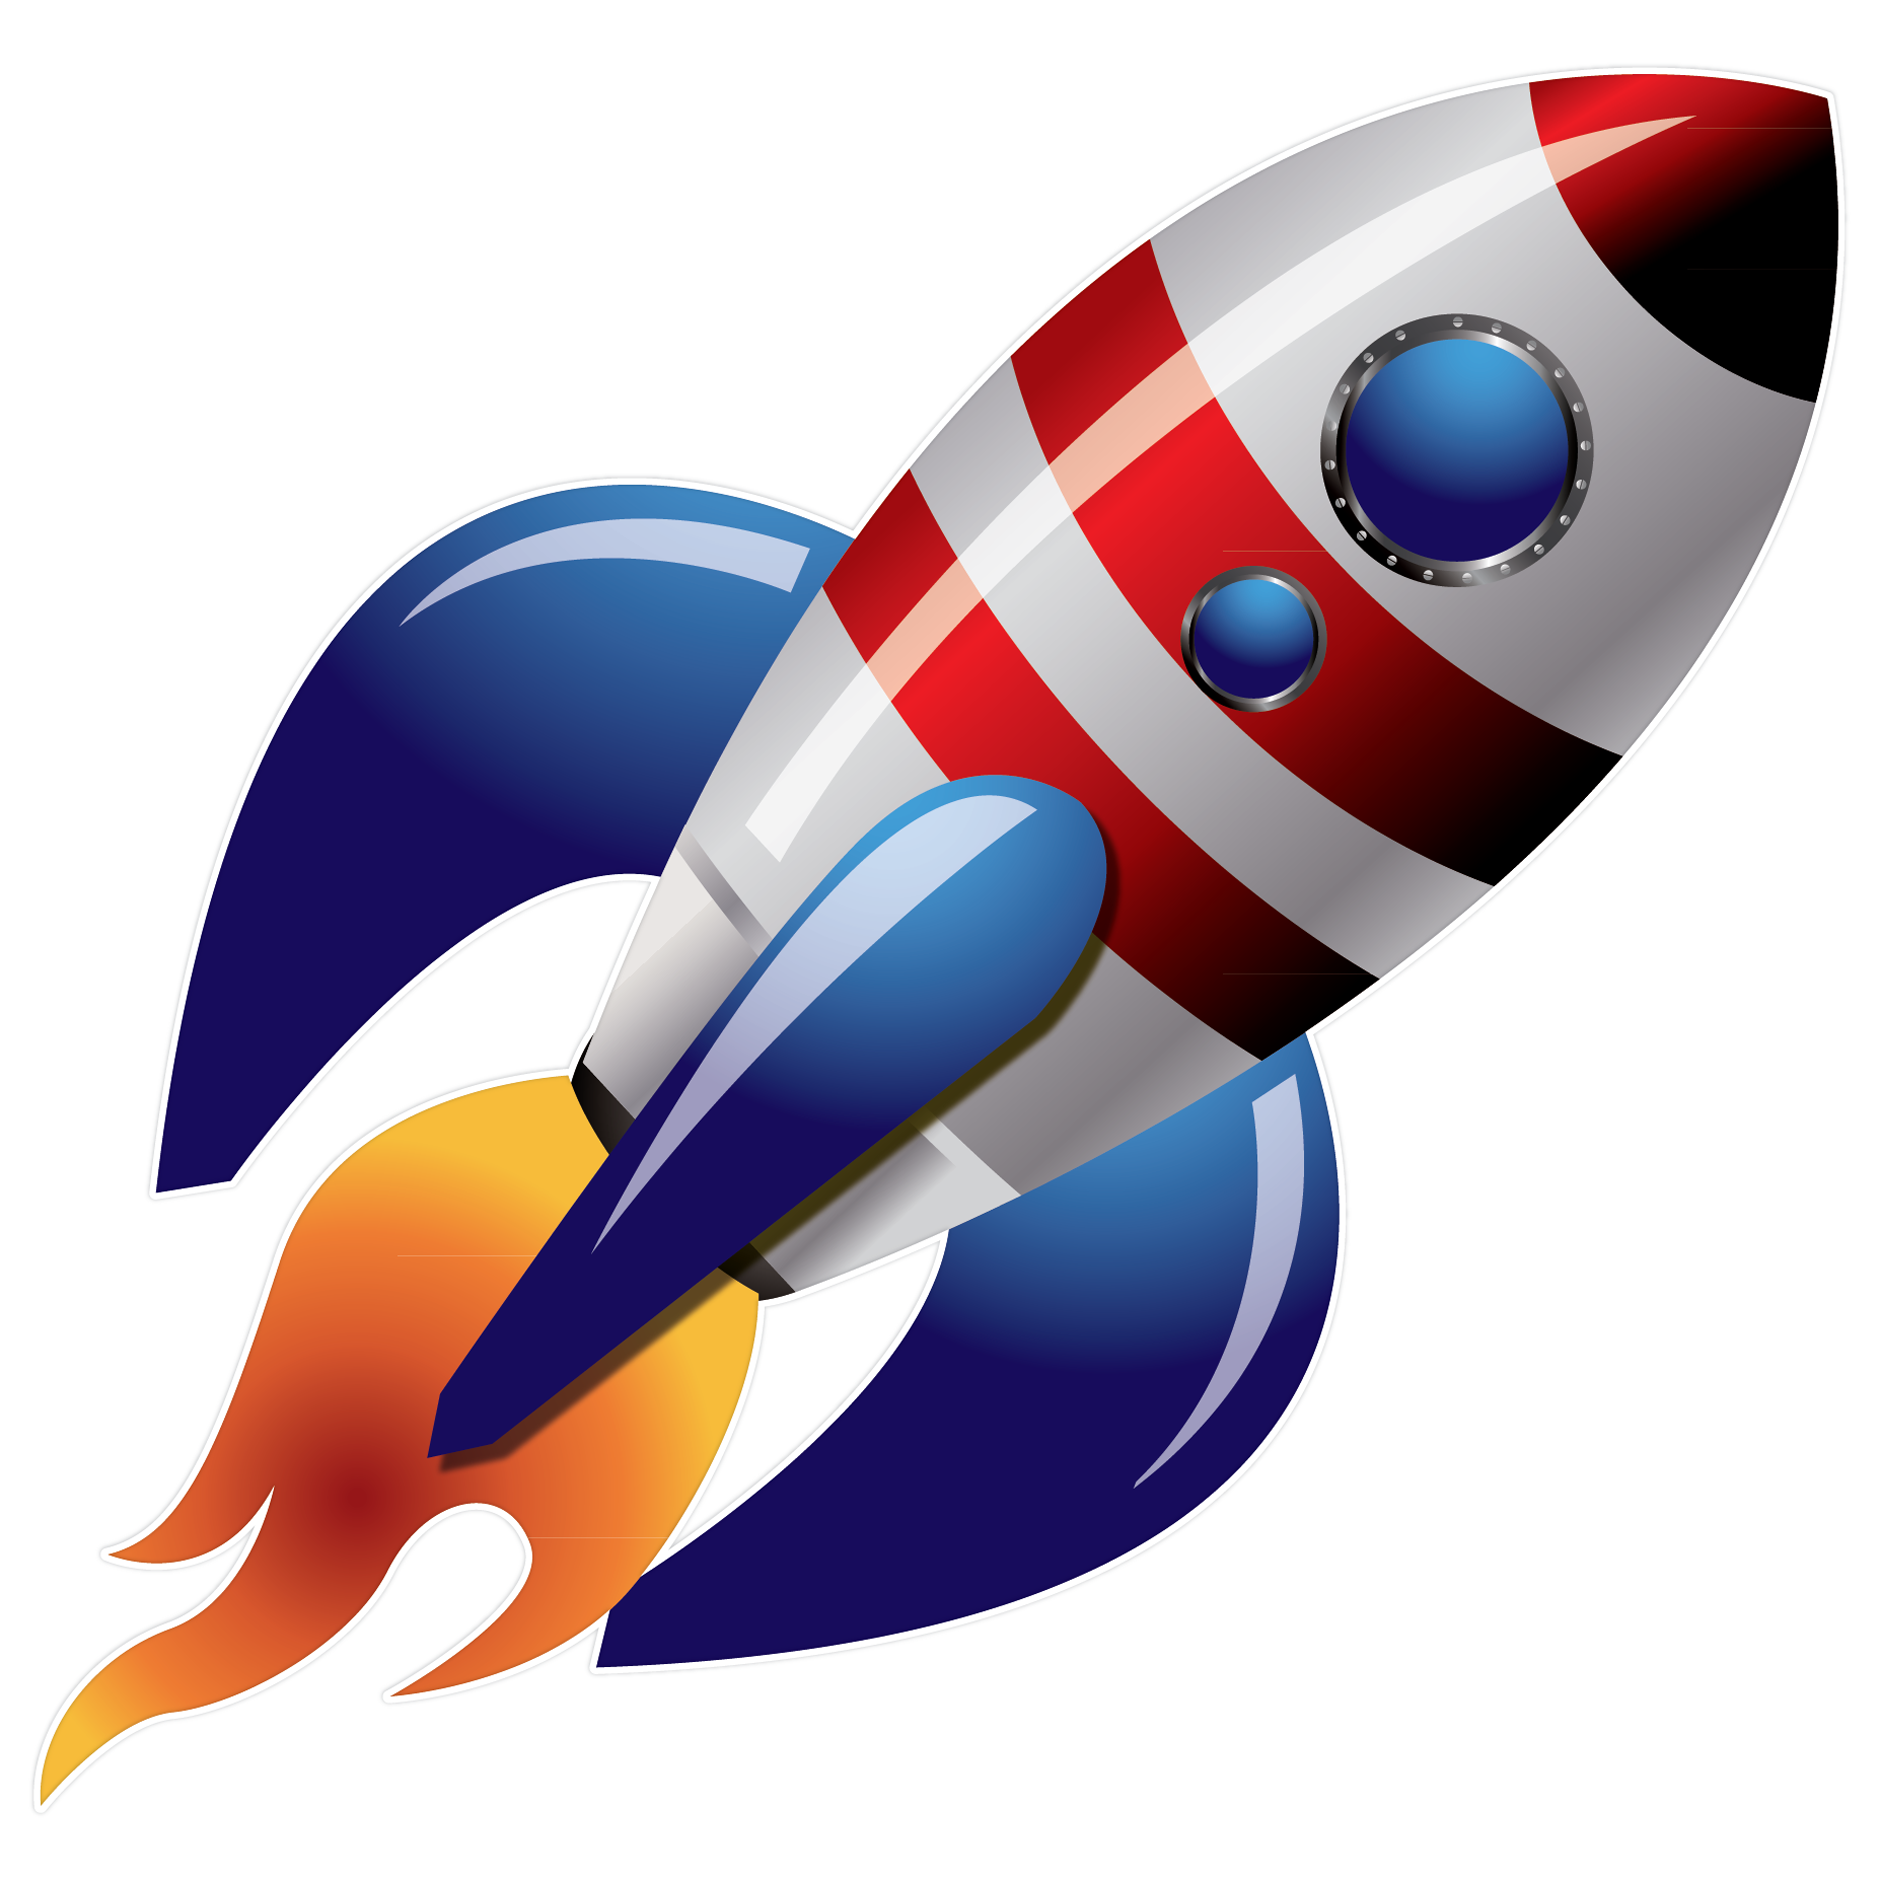 Download Free Rocket Ship Vector Download PNG Transparent Background, Free Download #30443 - FreeIconsPNG